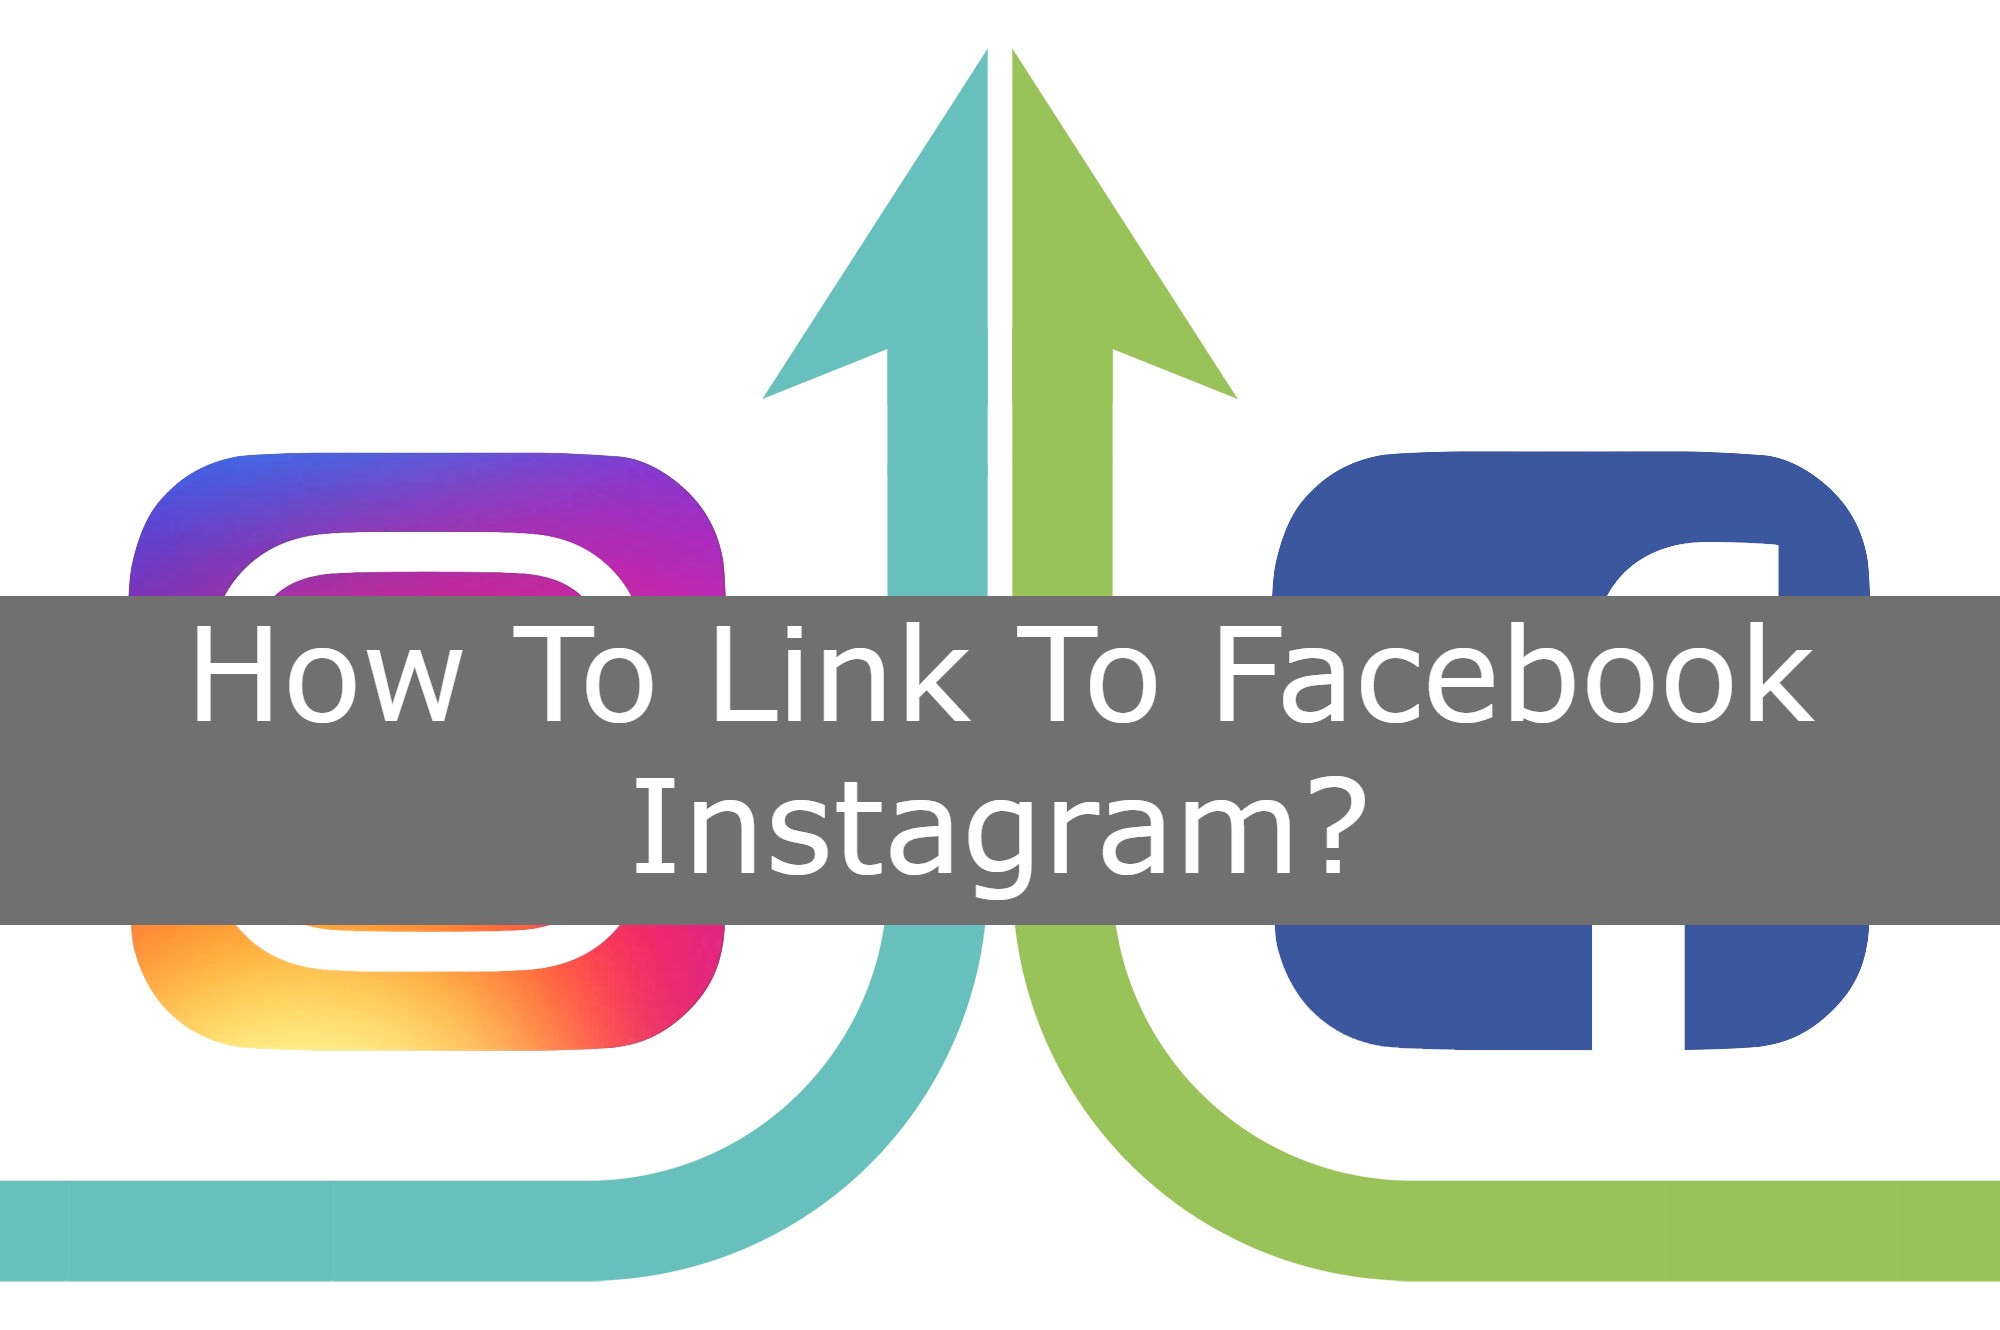 How To Link To Facebook Instagram?